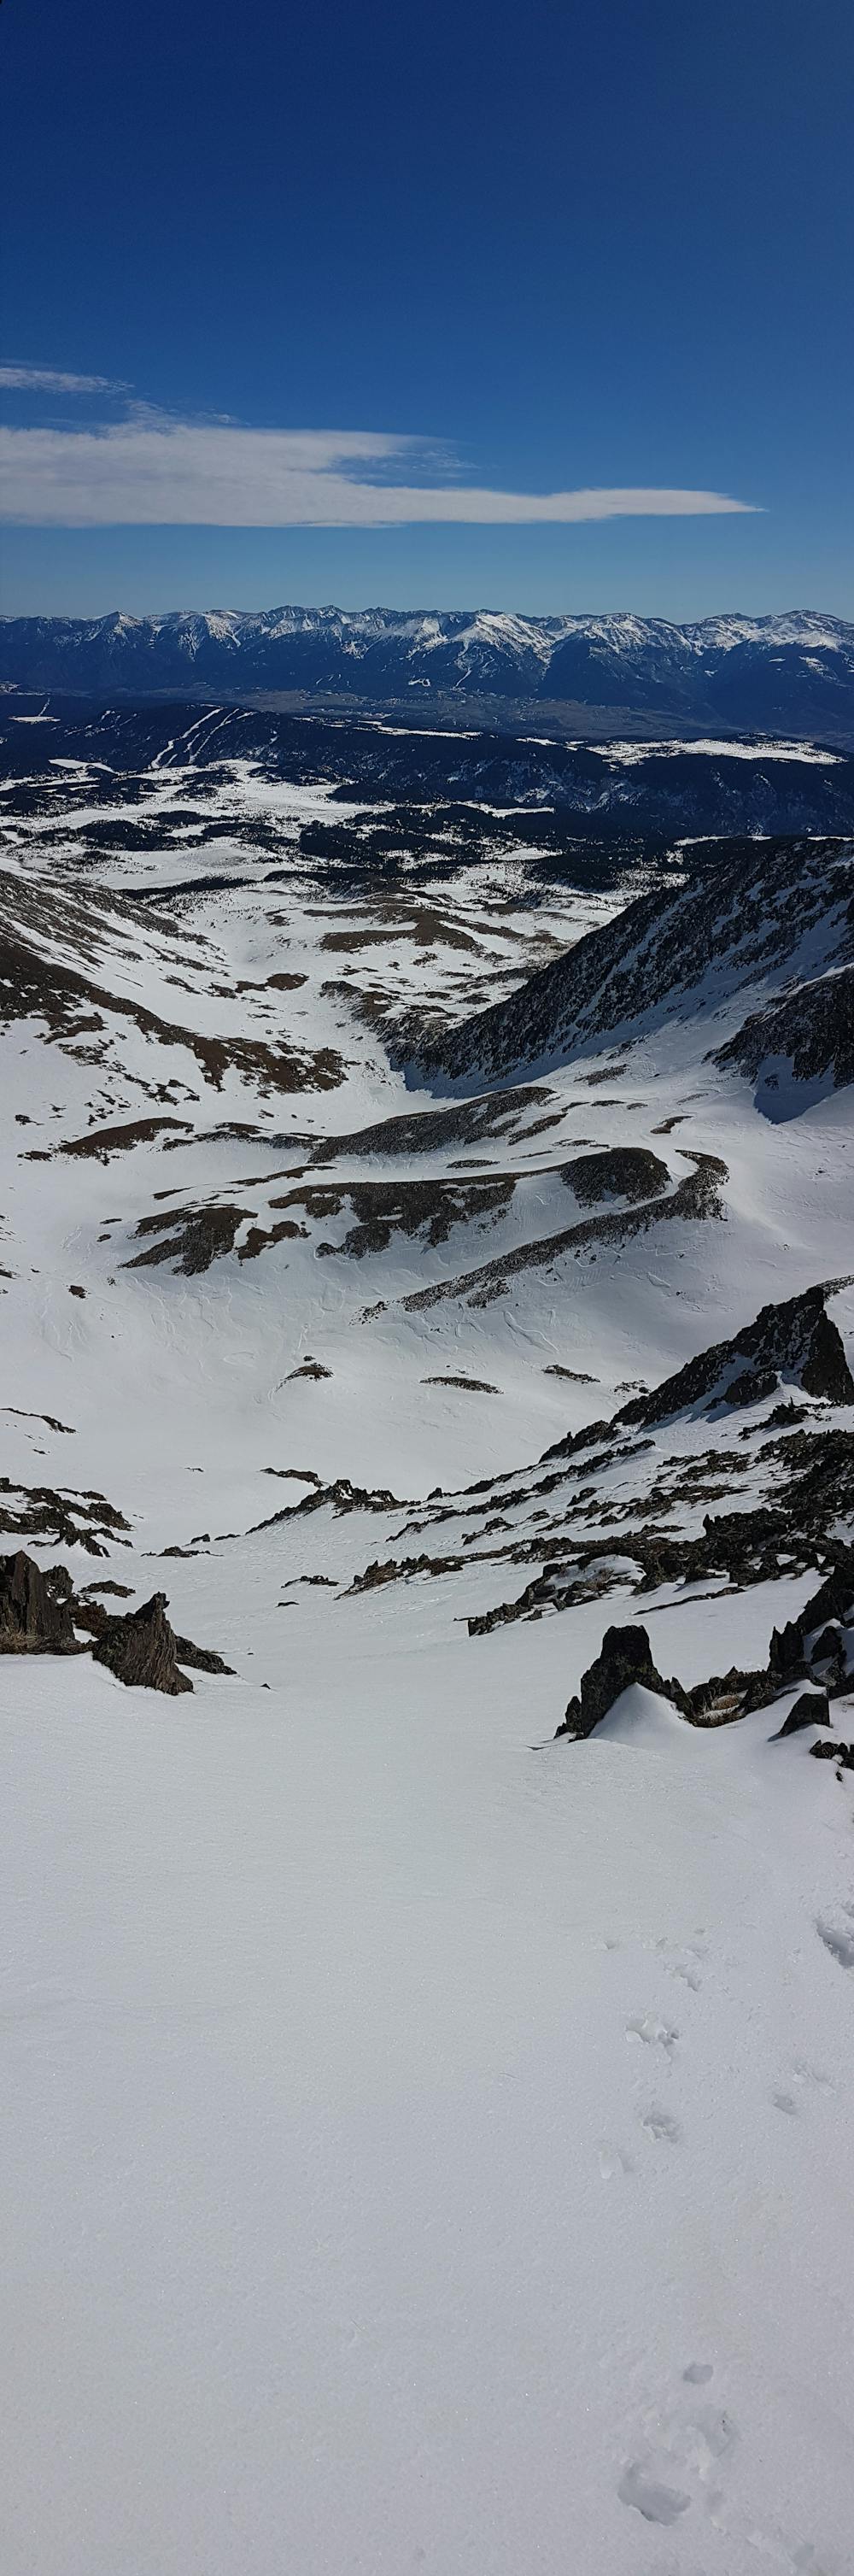 The couloir seen from the top